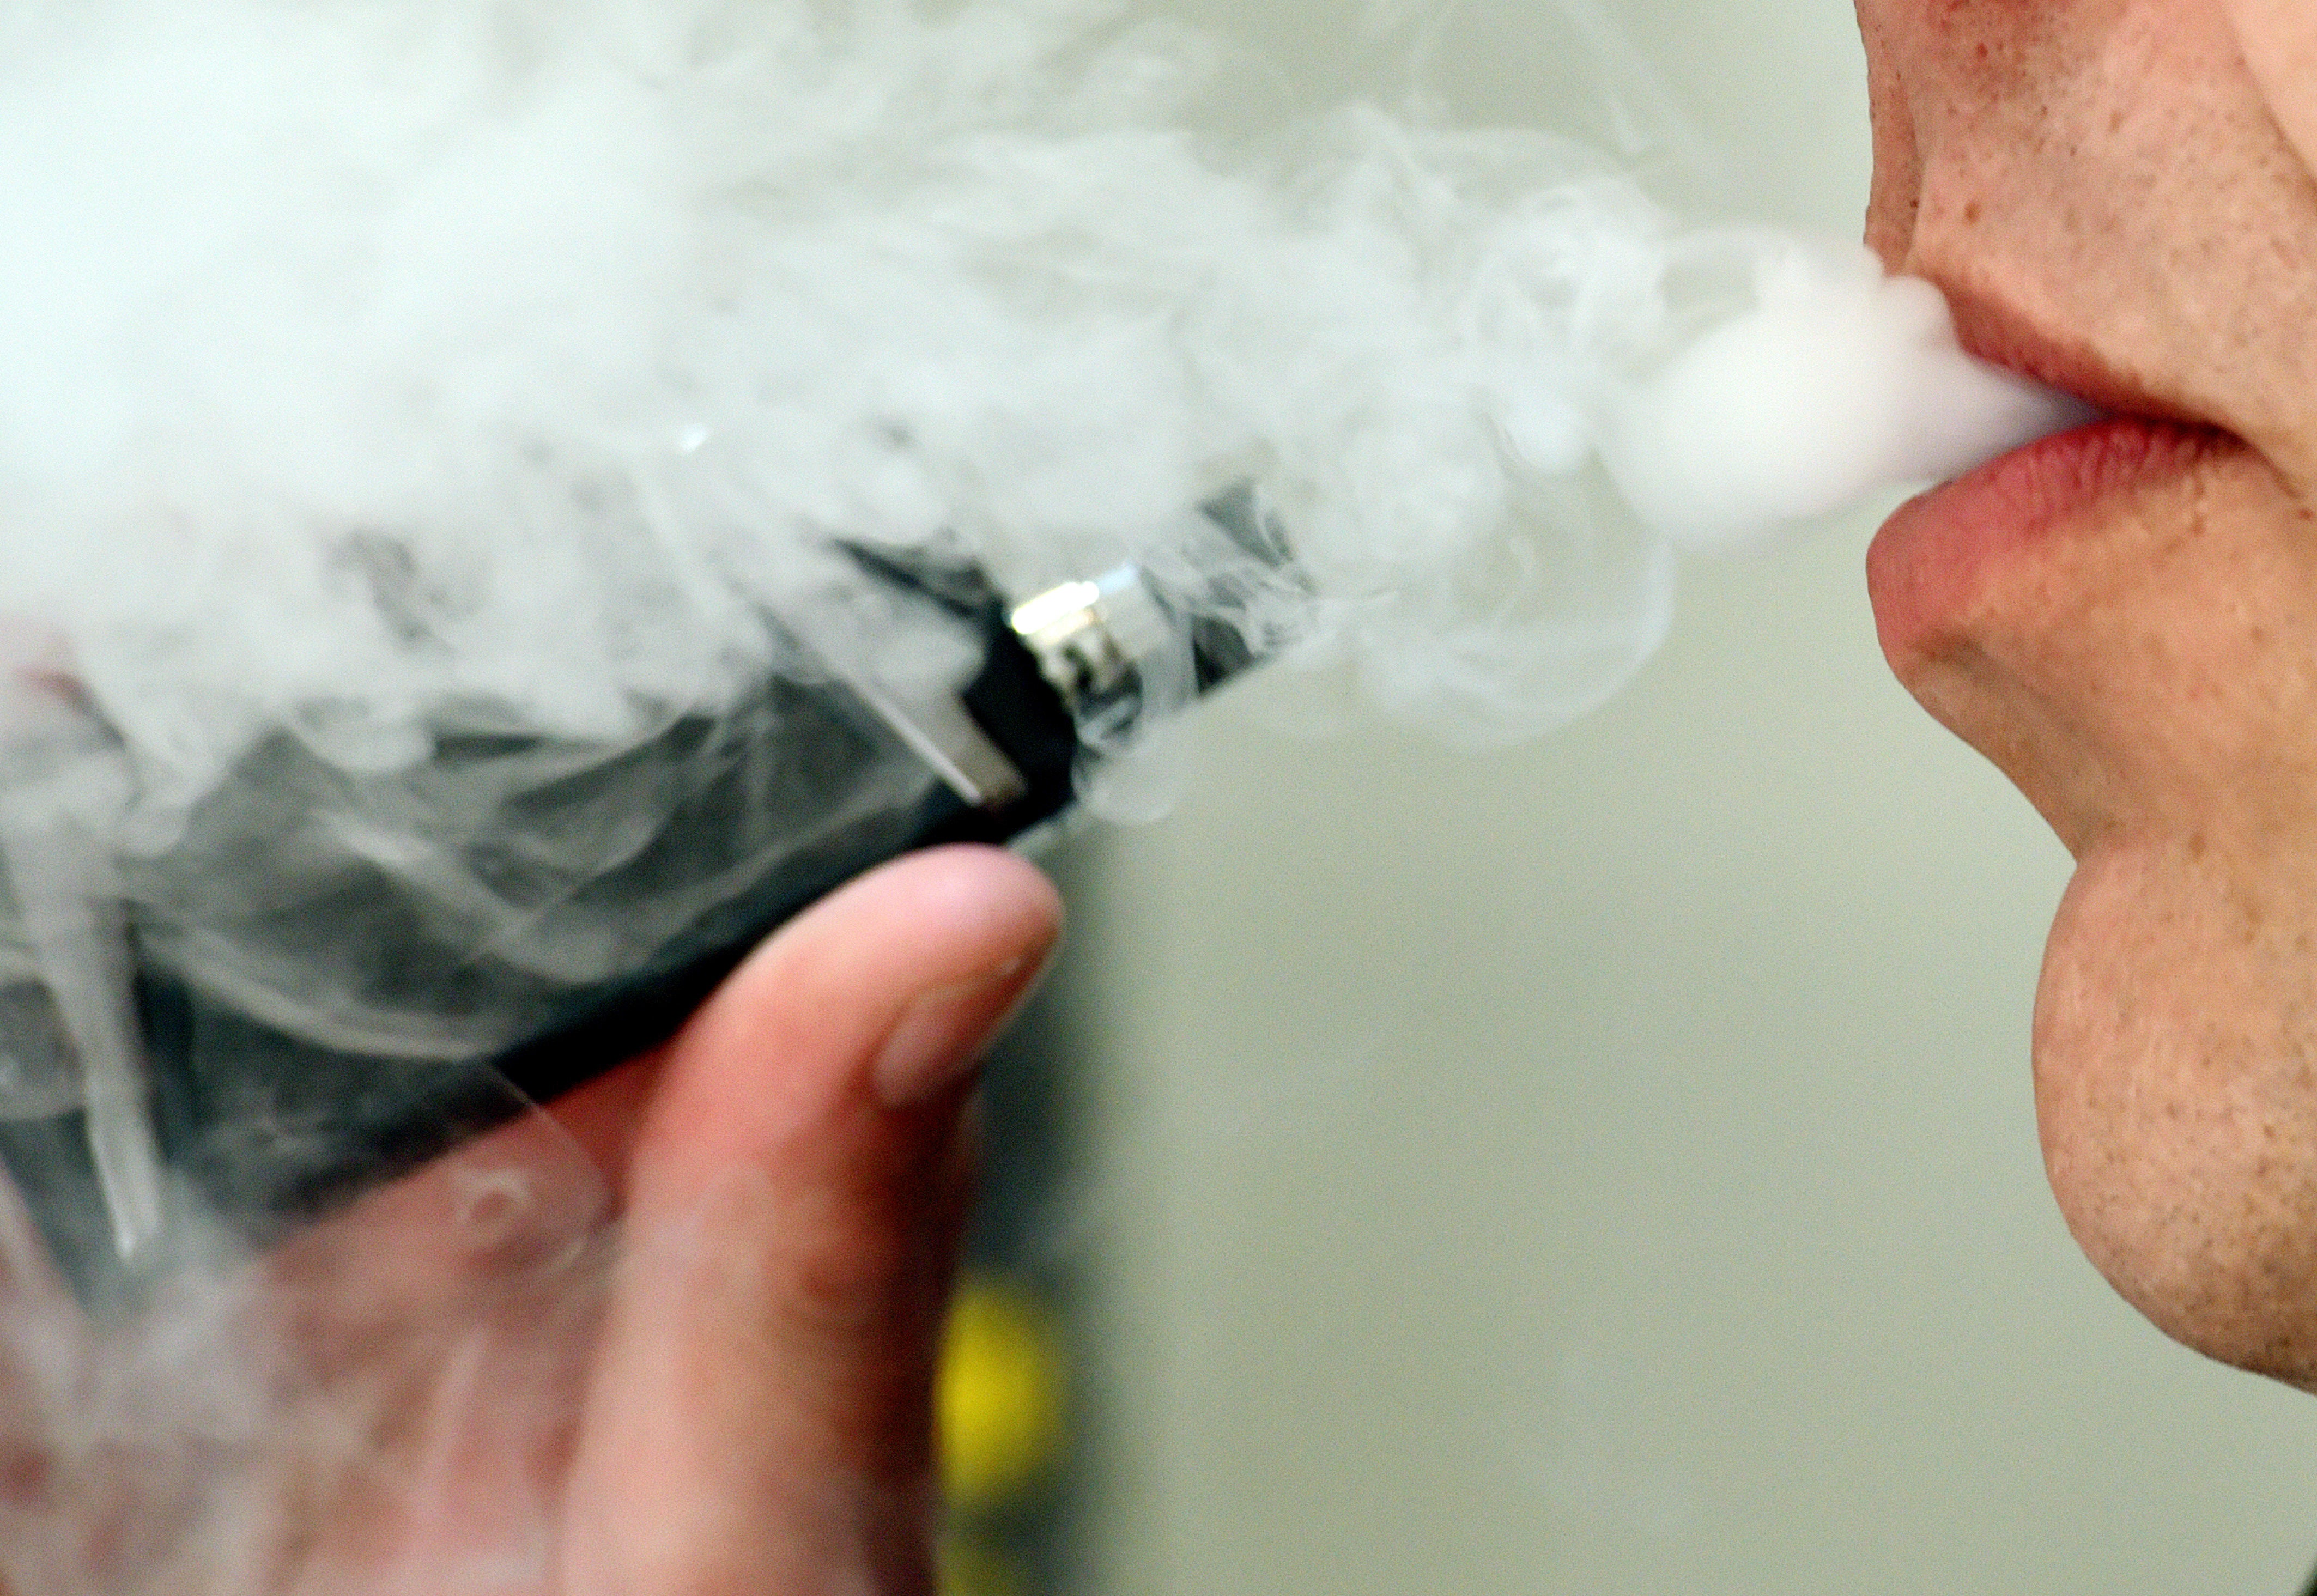 New data shows almost 10 per cent of 11- to-15-year-olds smoke e-cigarettes